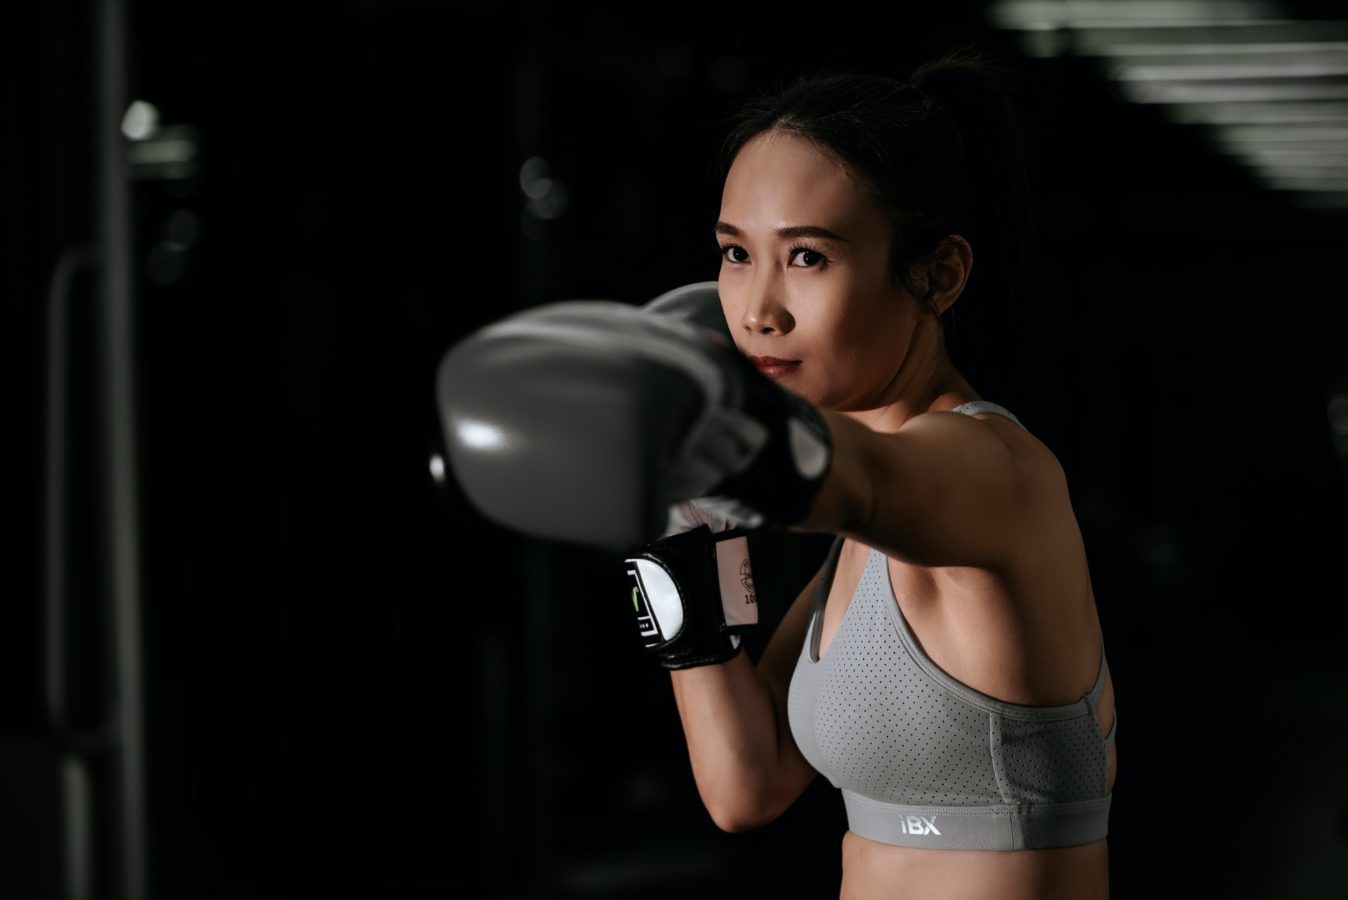 9 boxing combinations to build up total body strength